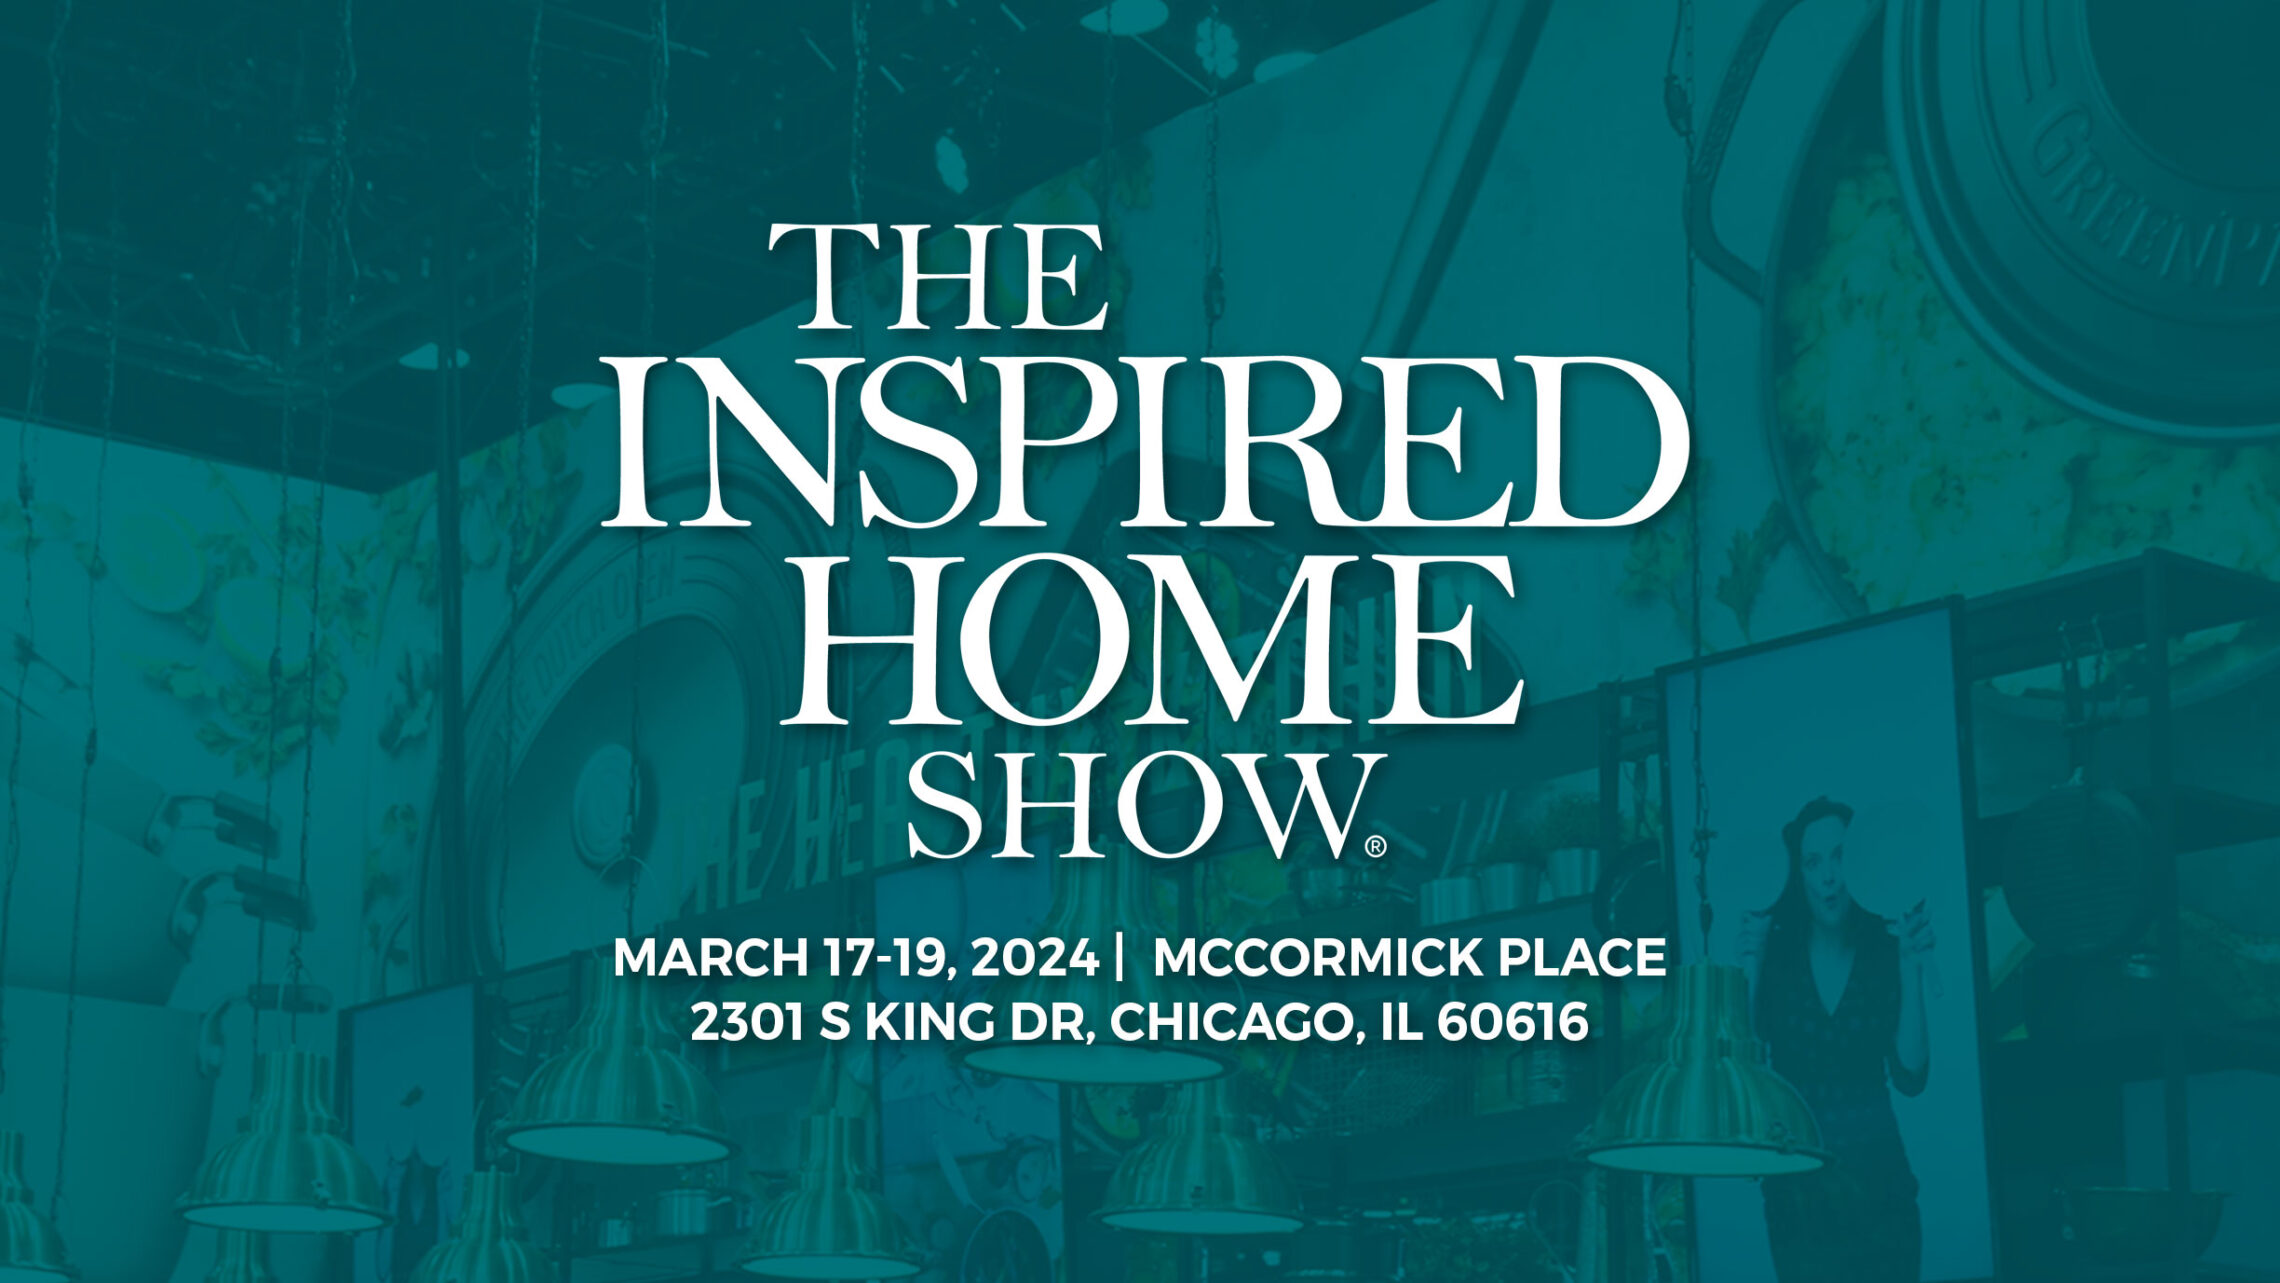 The Inspired Home Show in Chicago